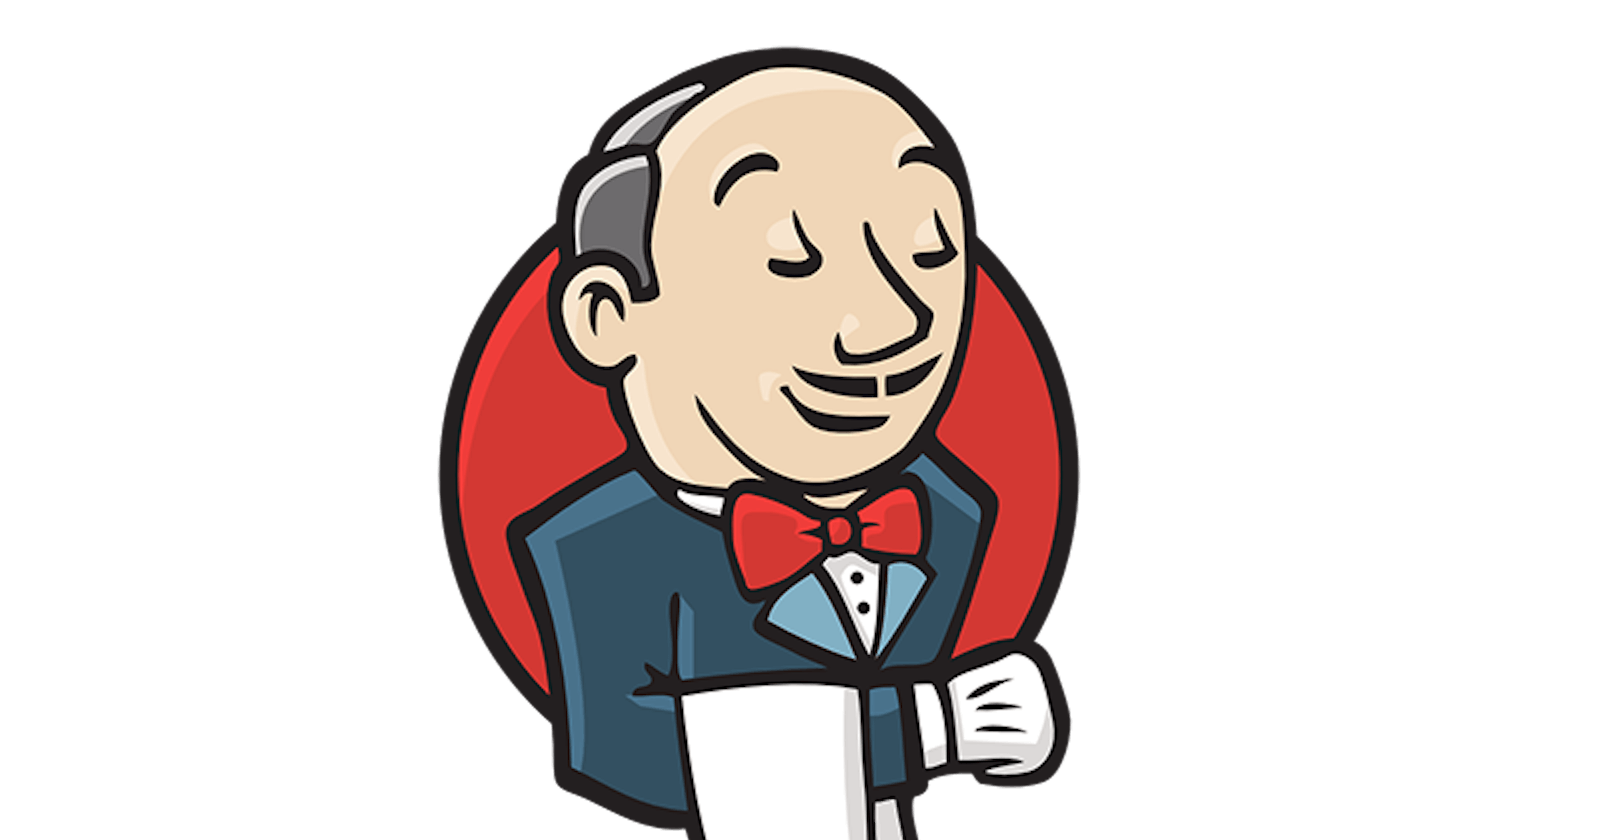 How to install Jenkins on linux